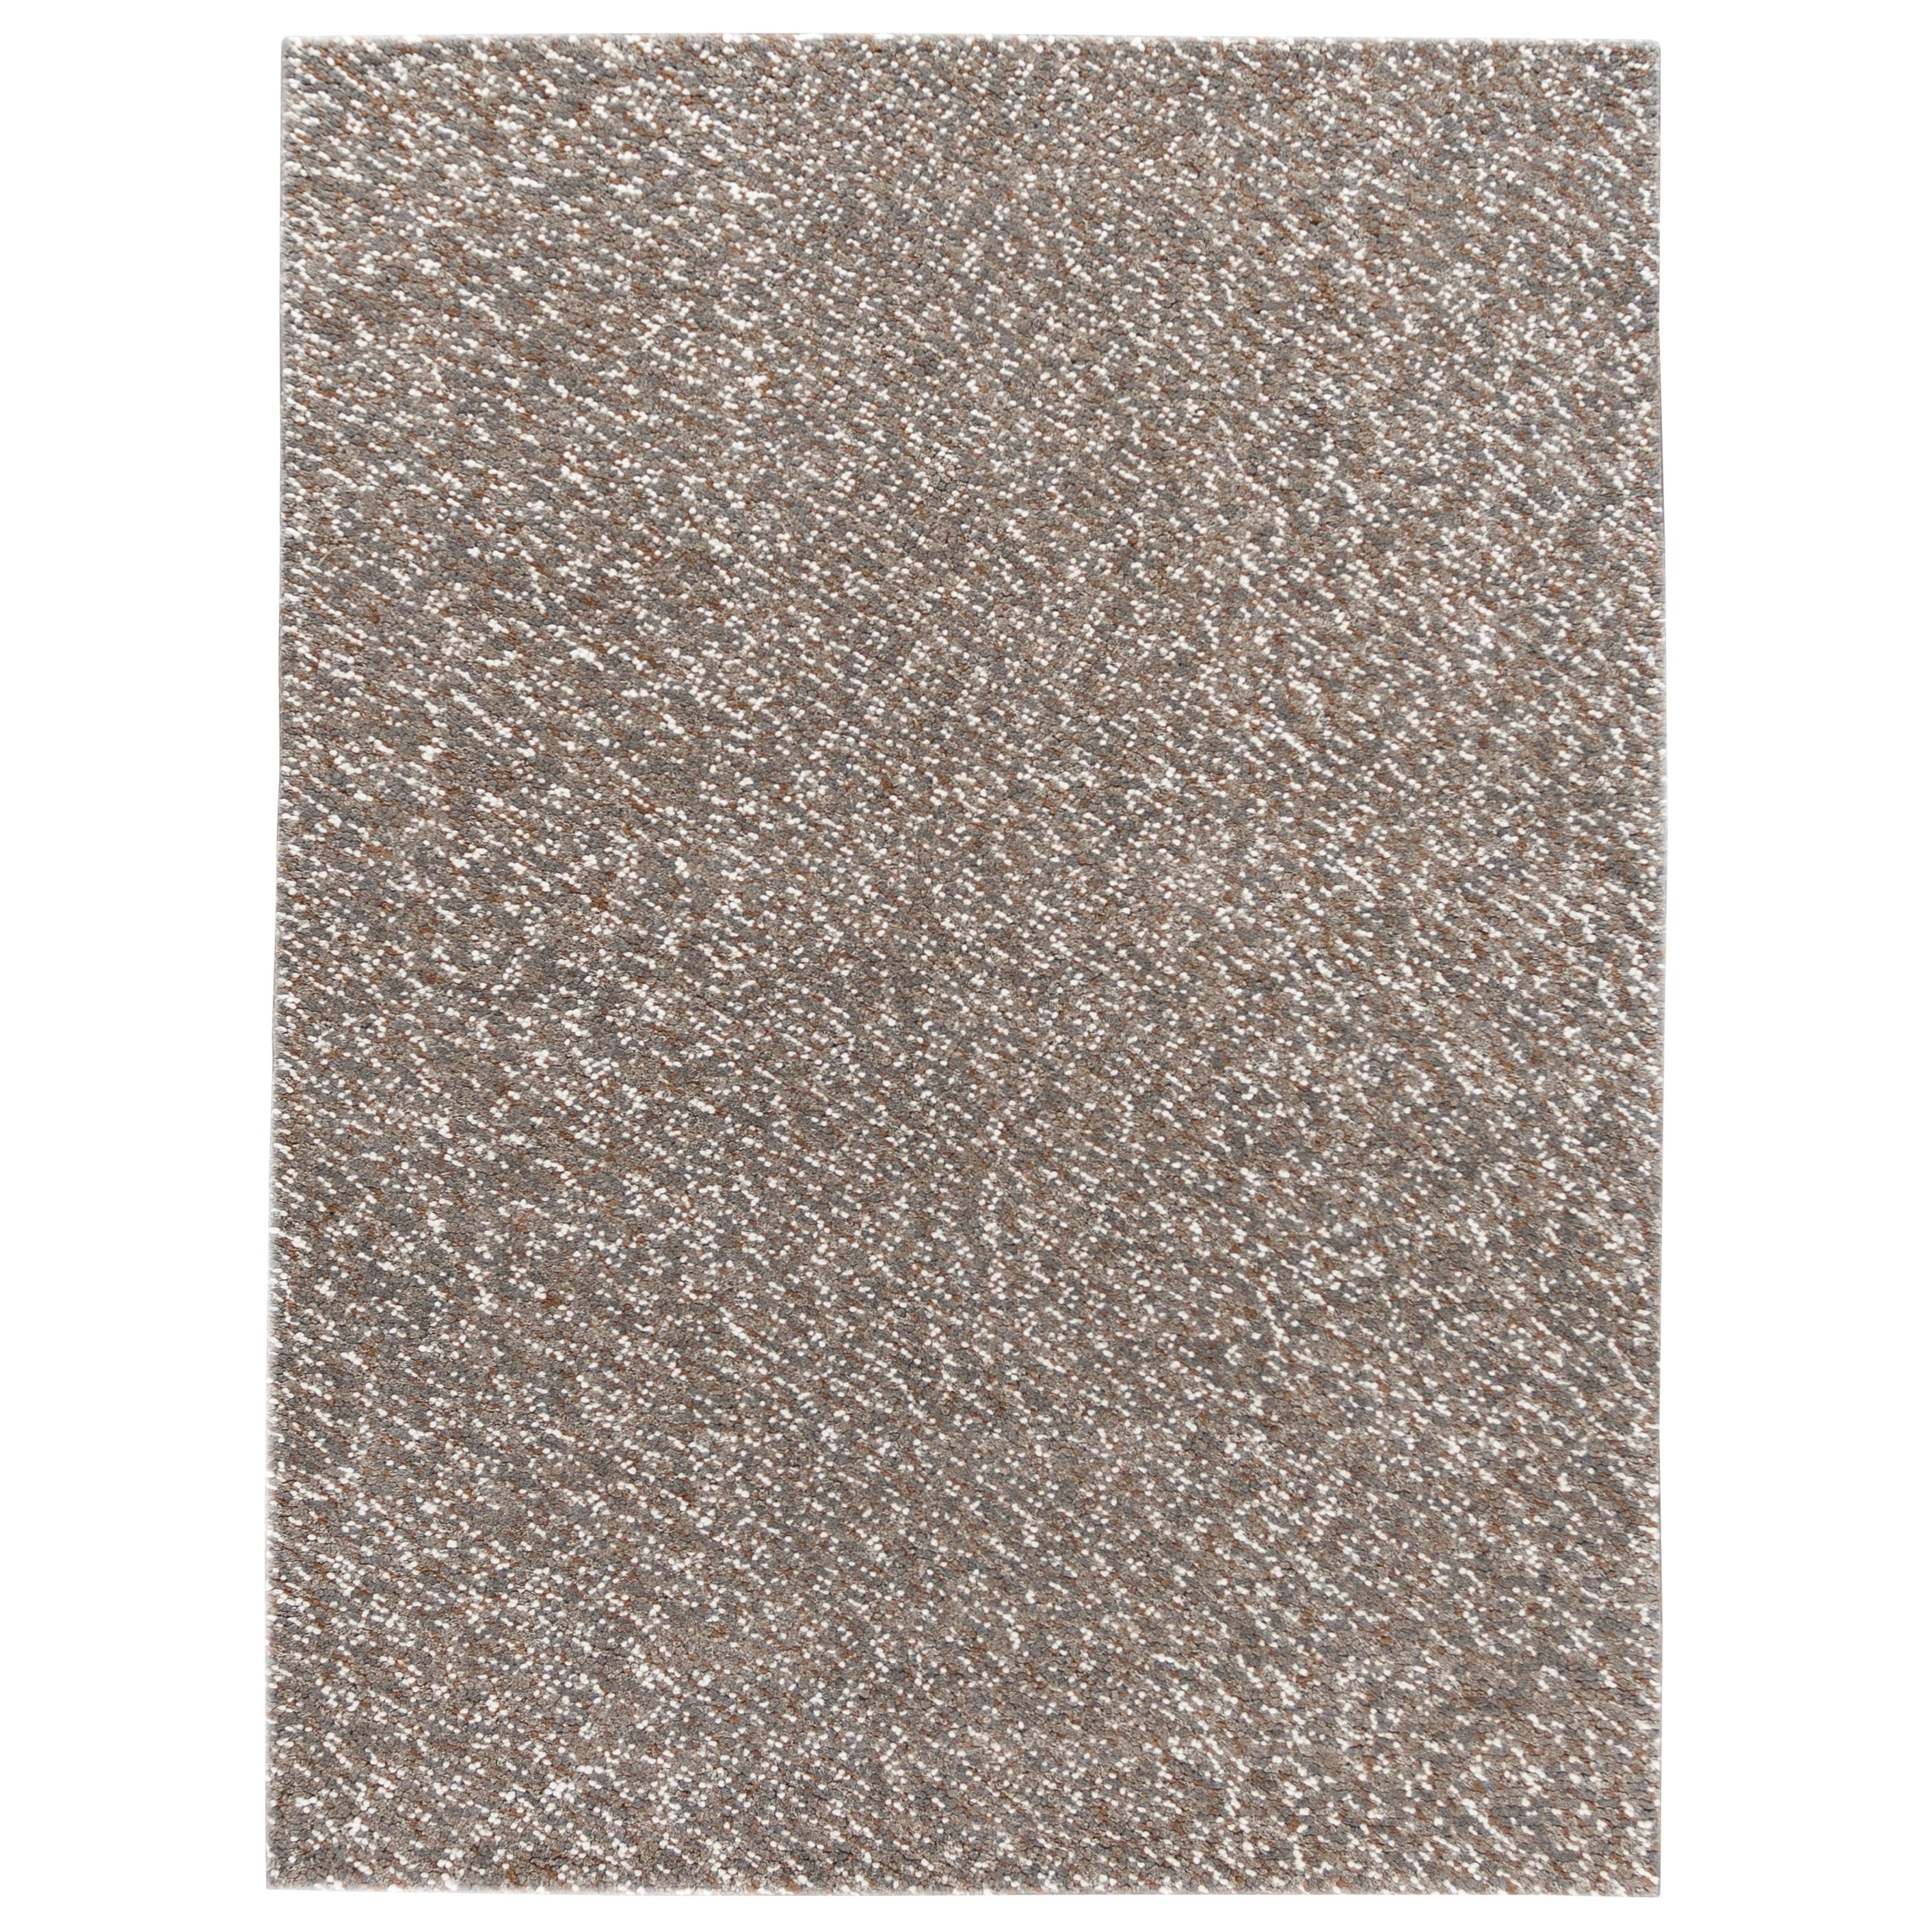 Contemporary Handwoven Grey Textured Wool Rug